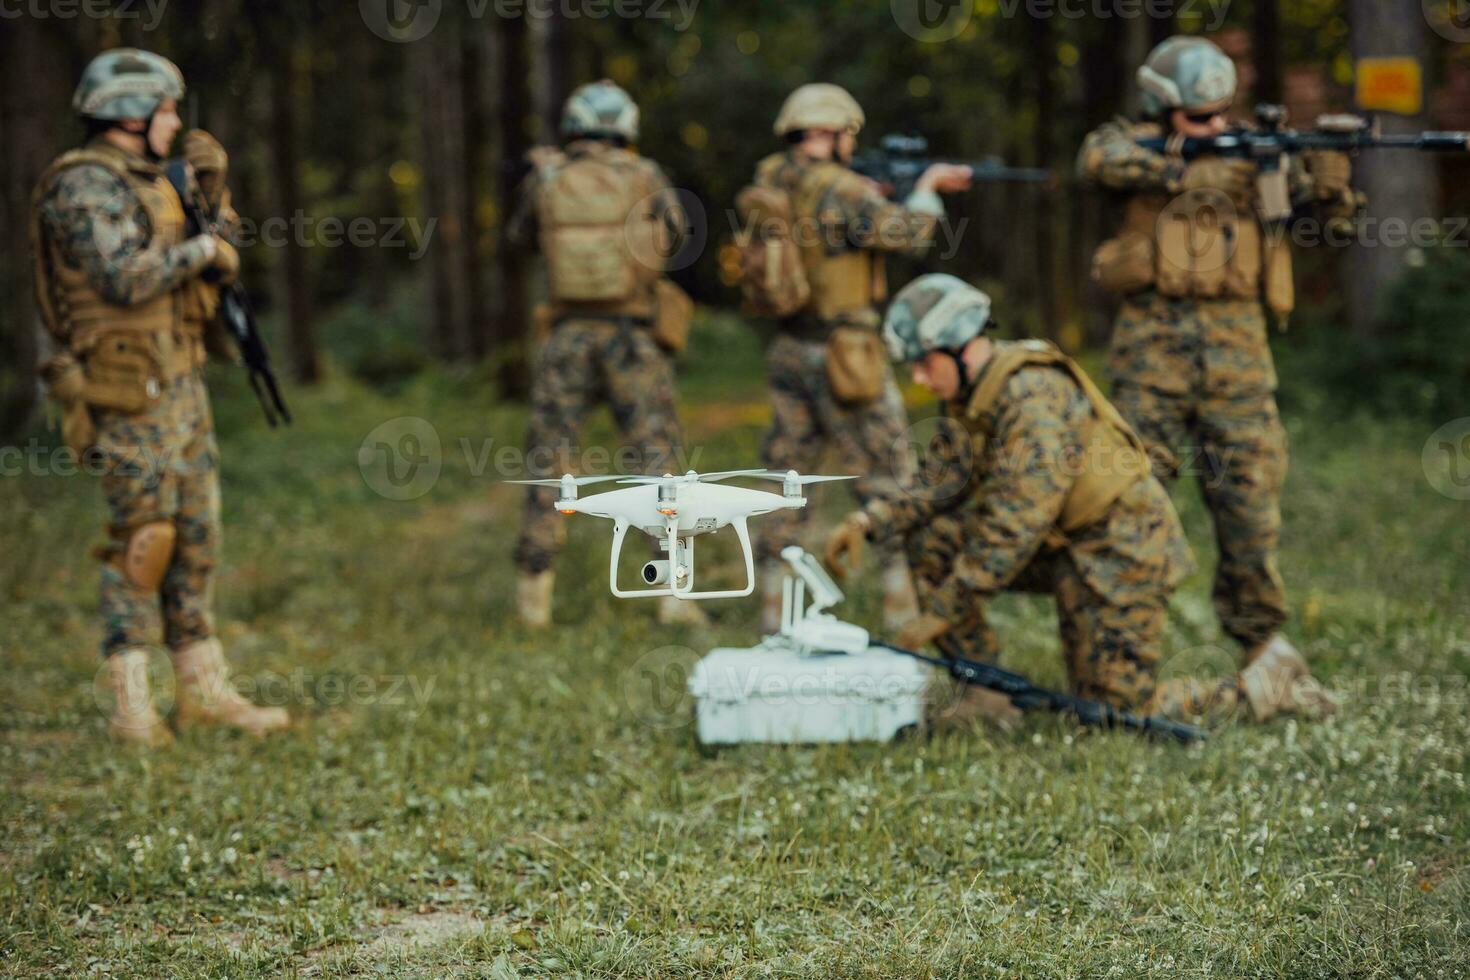 Modern Warfare Soldiers Squad are Using Drone for Scouting and Surveillance During Military Operation in the Forest. photo